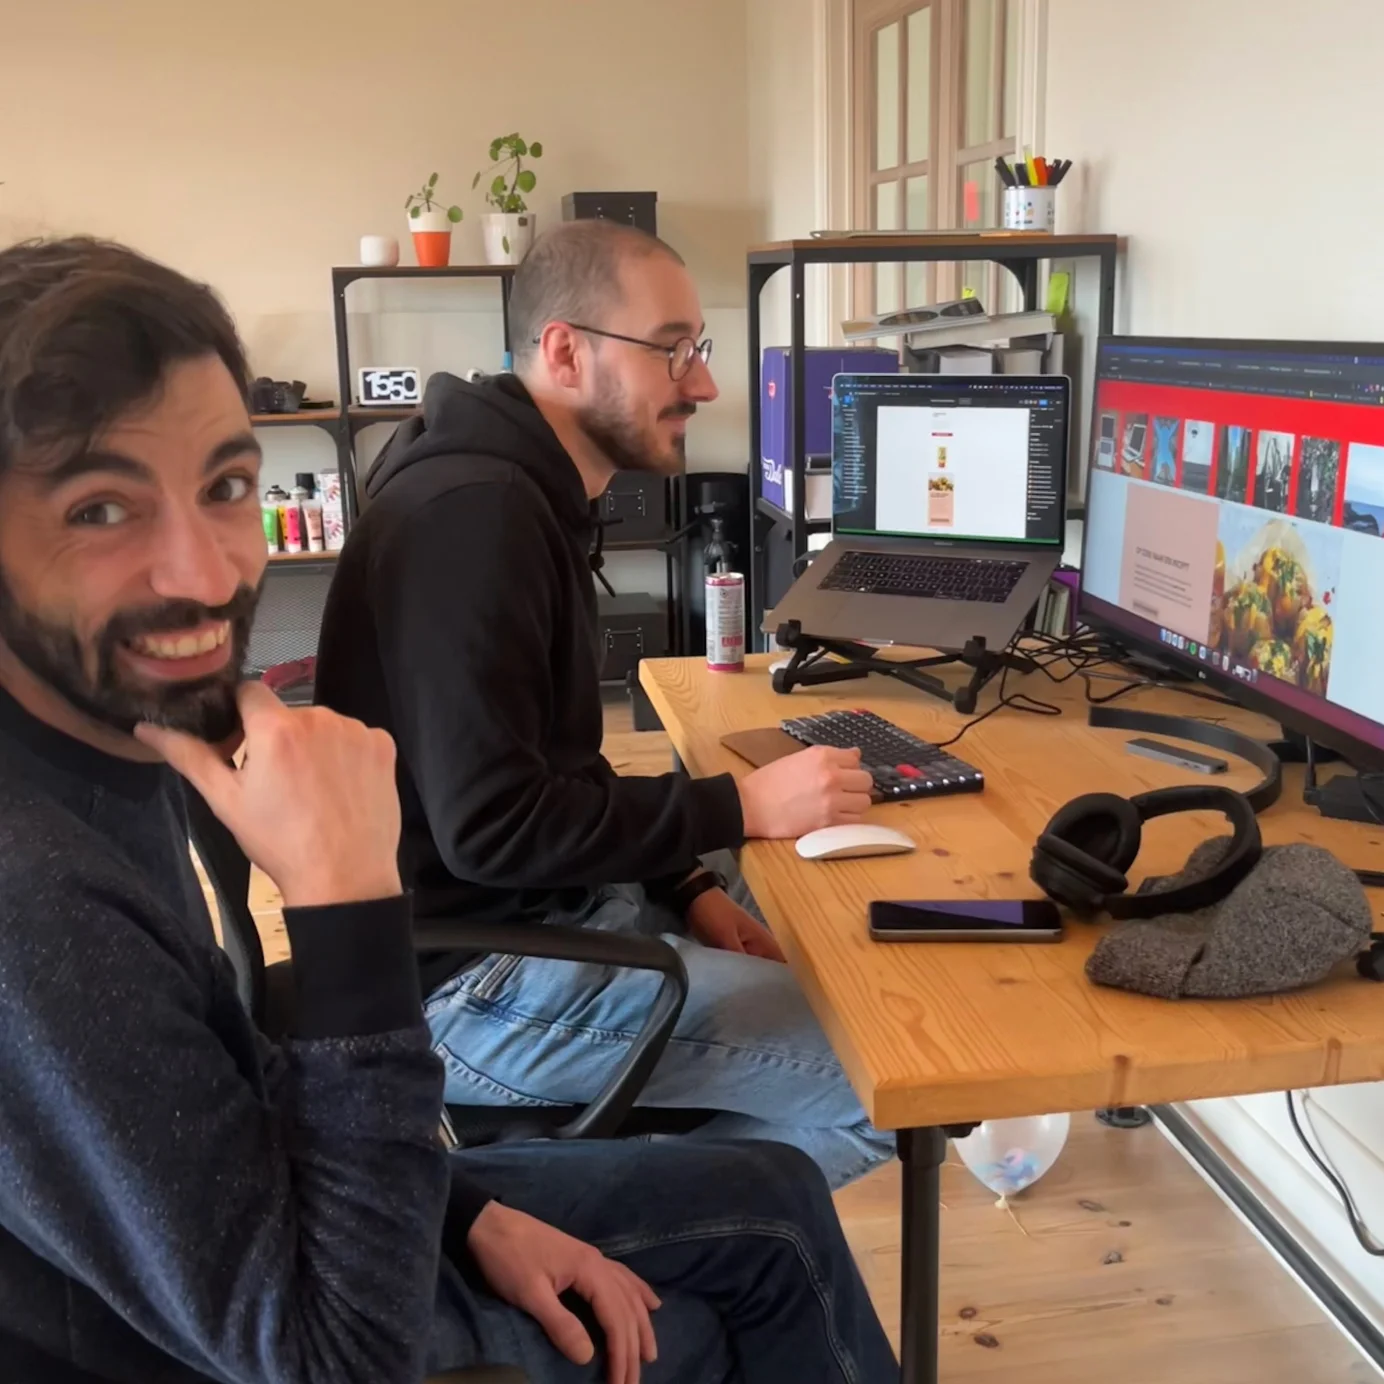 Two guys working together at one desk, one guy is looking at the screen, the other is looking at the camera